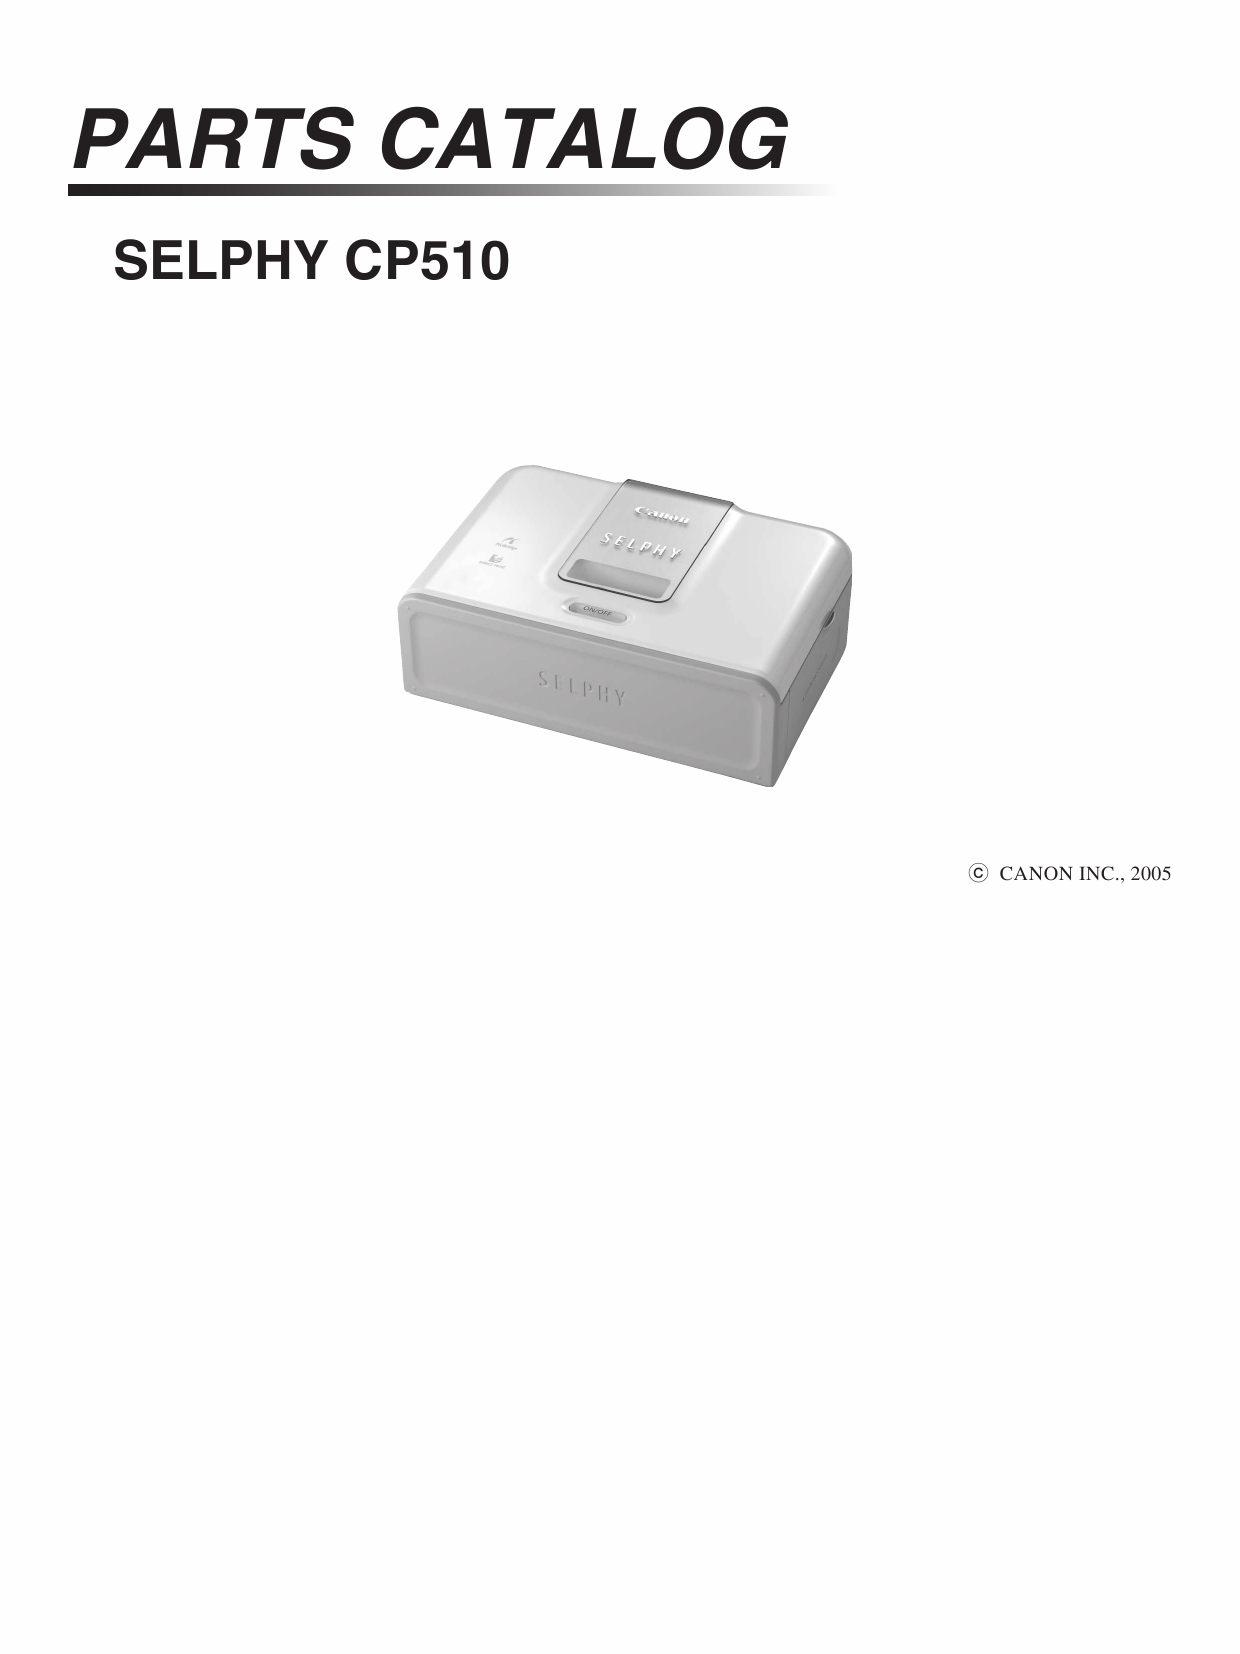 Canon SELPHY CP510 Parts Catalog Manual-1